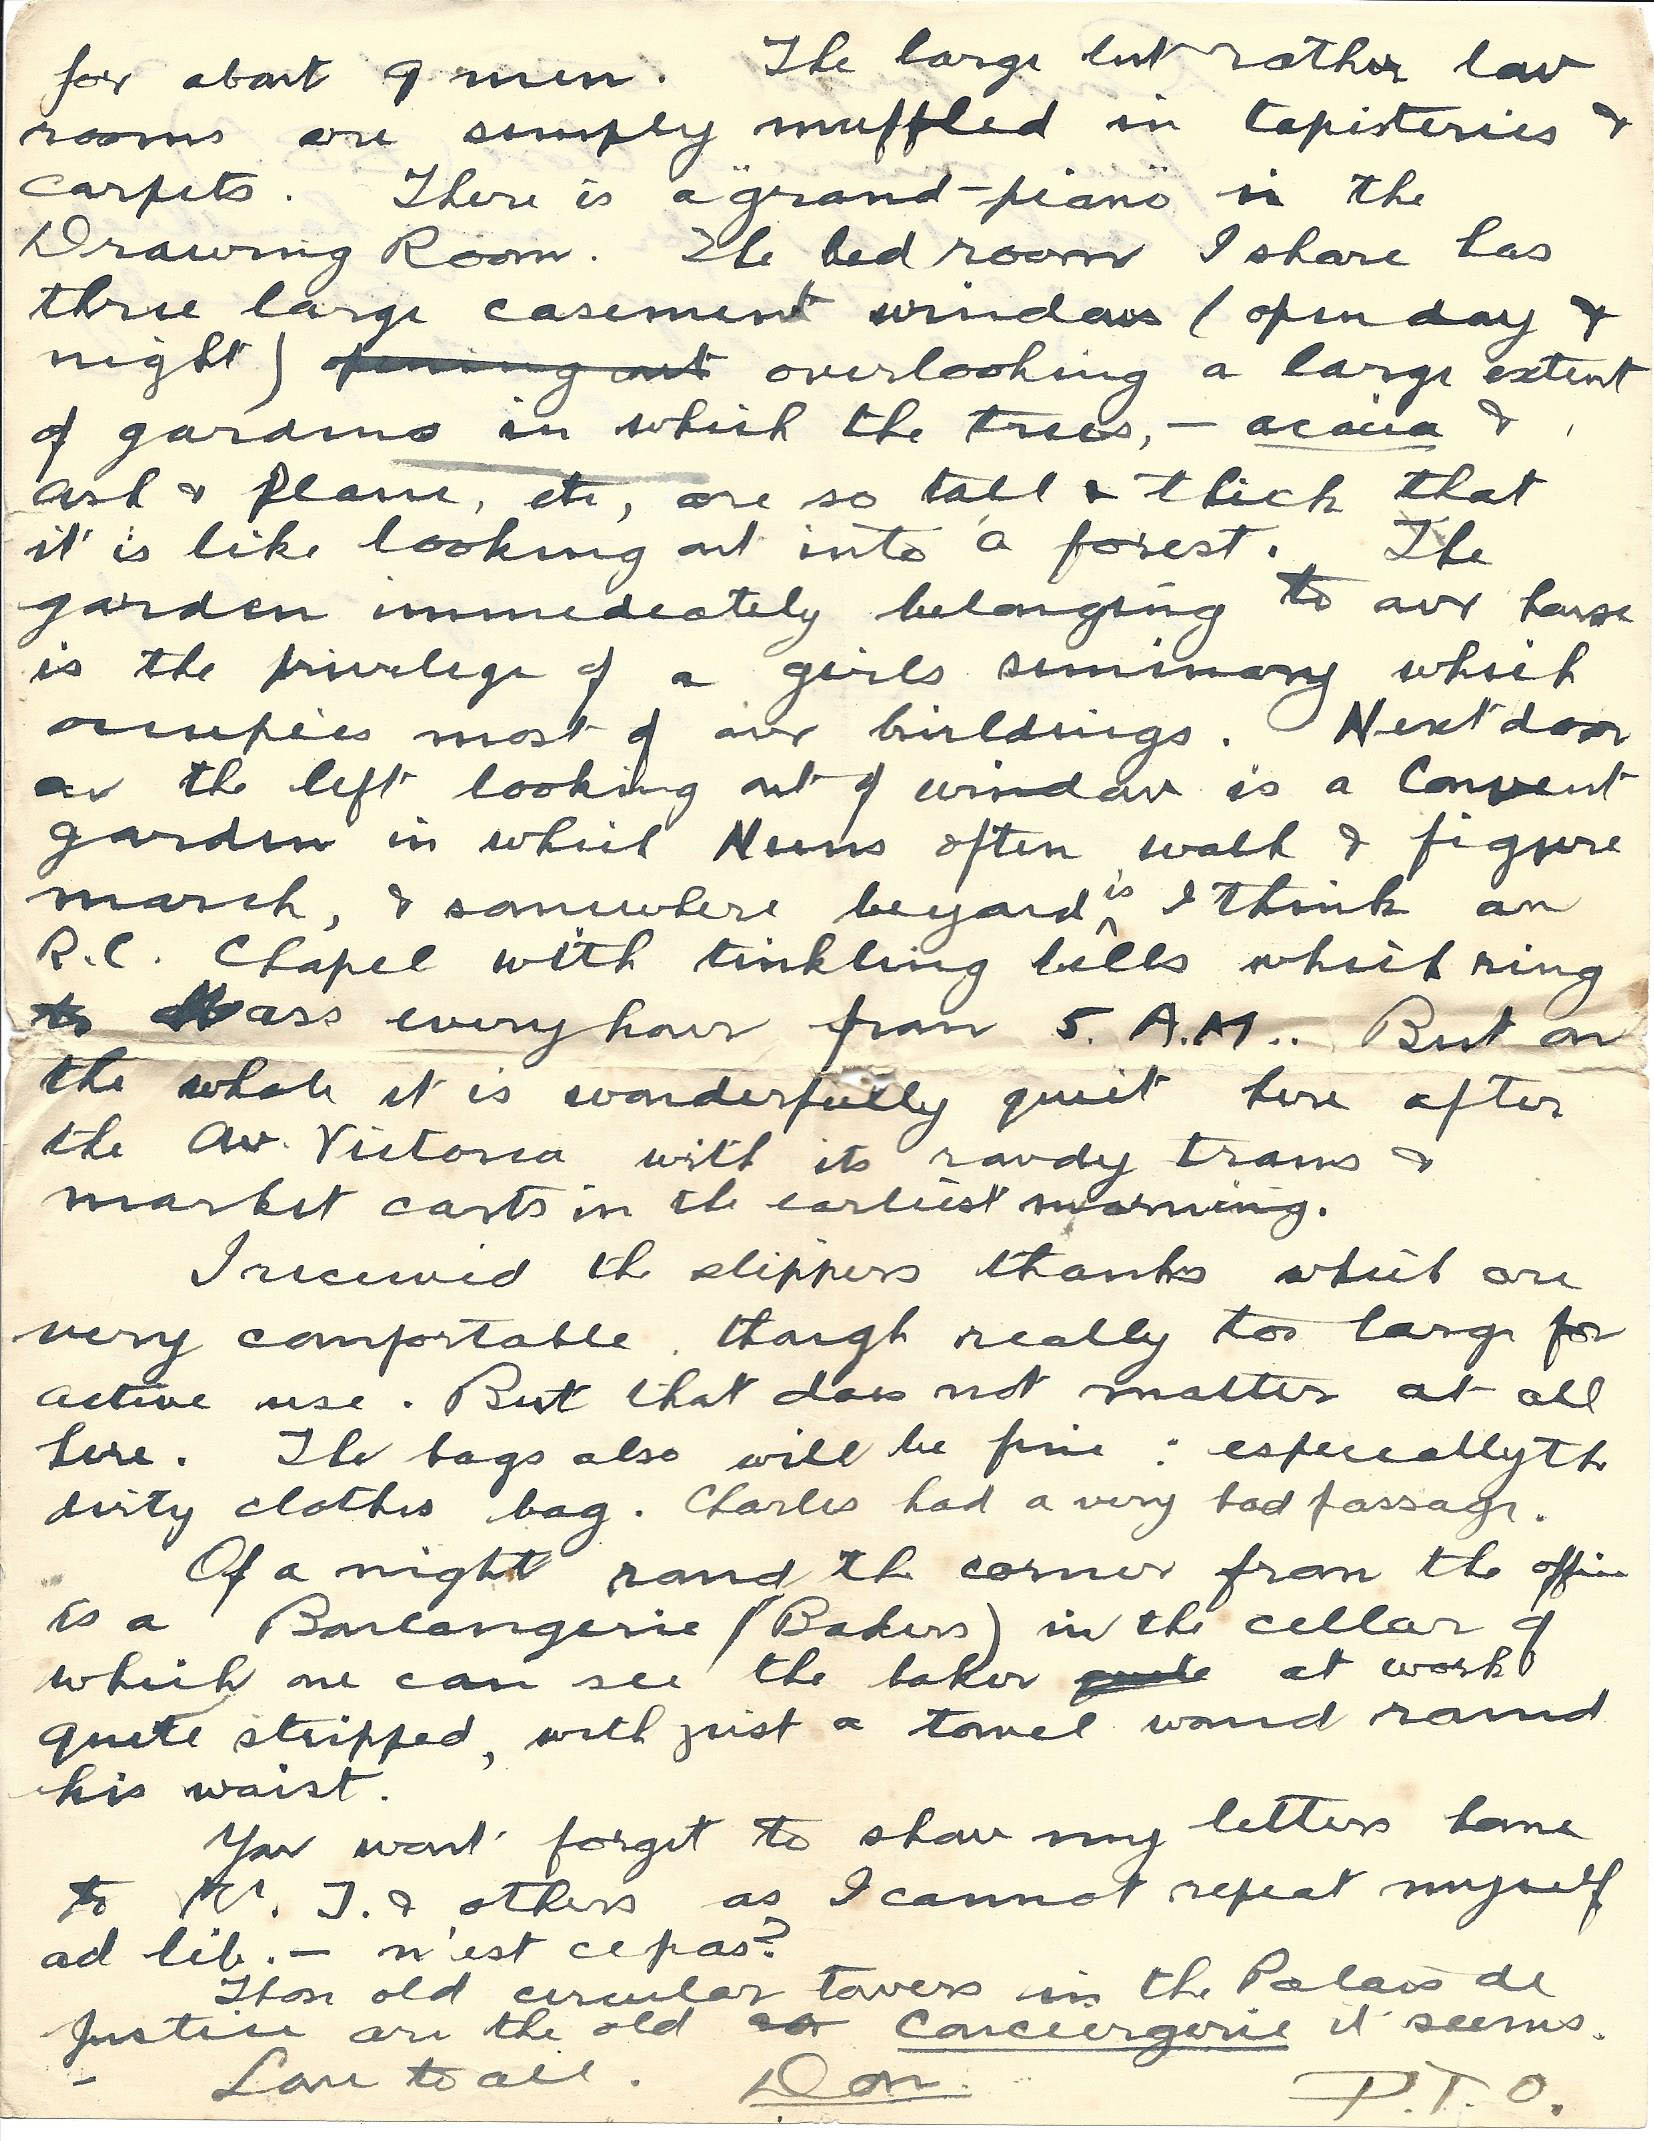 1919-07-25 p2 Donald Bearman letter to his father